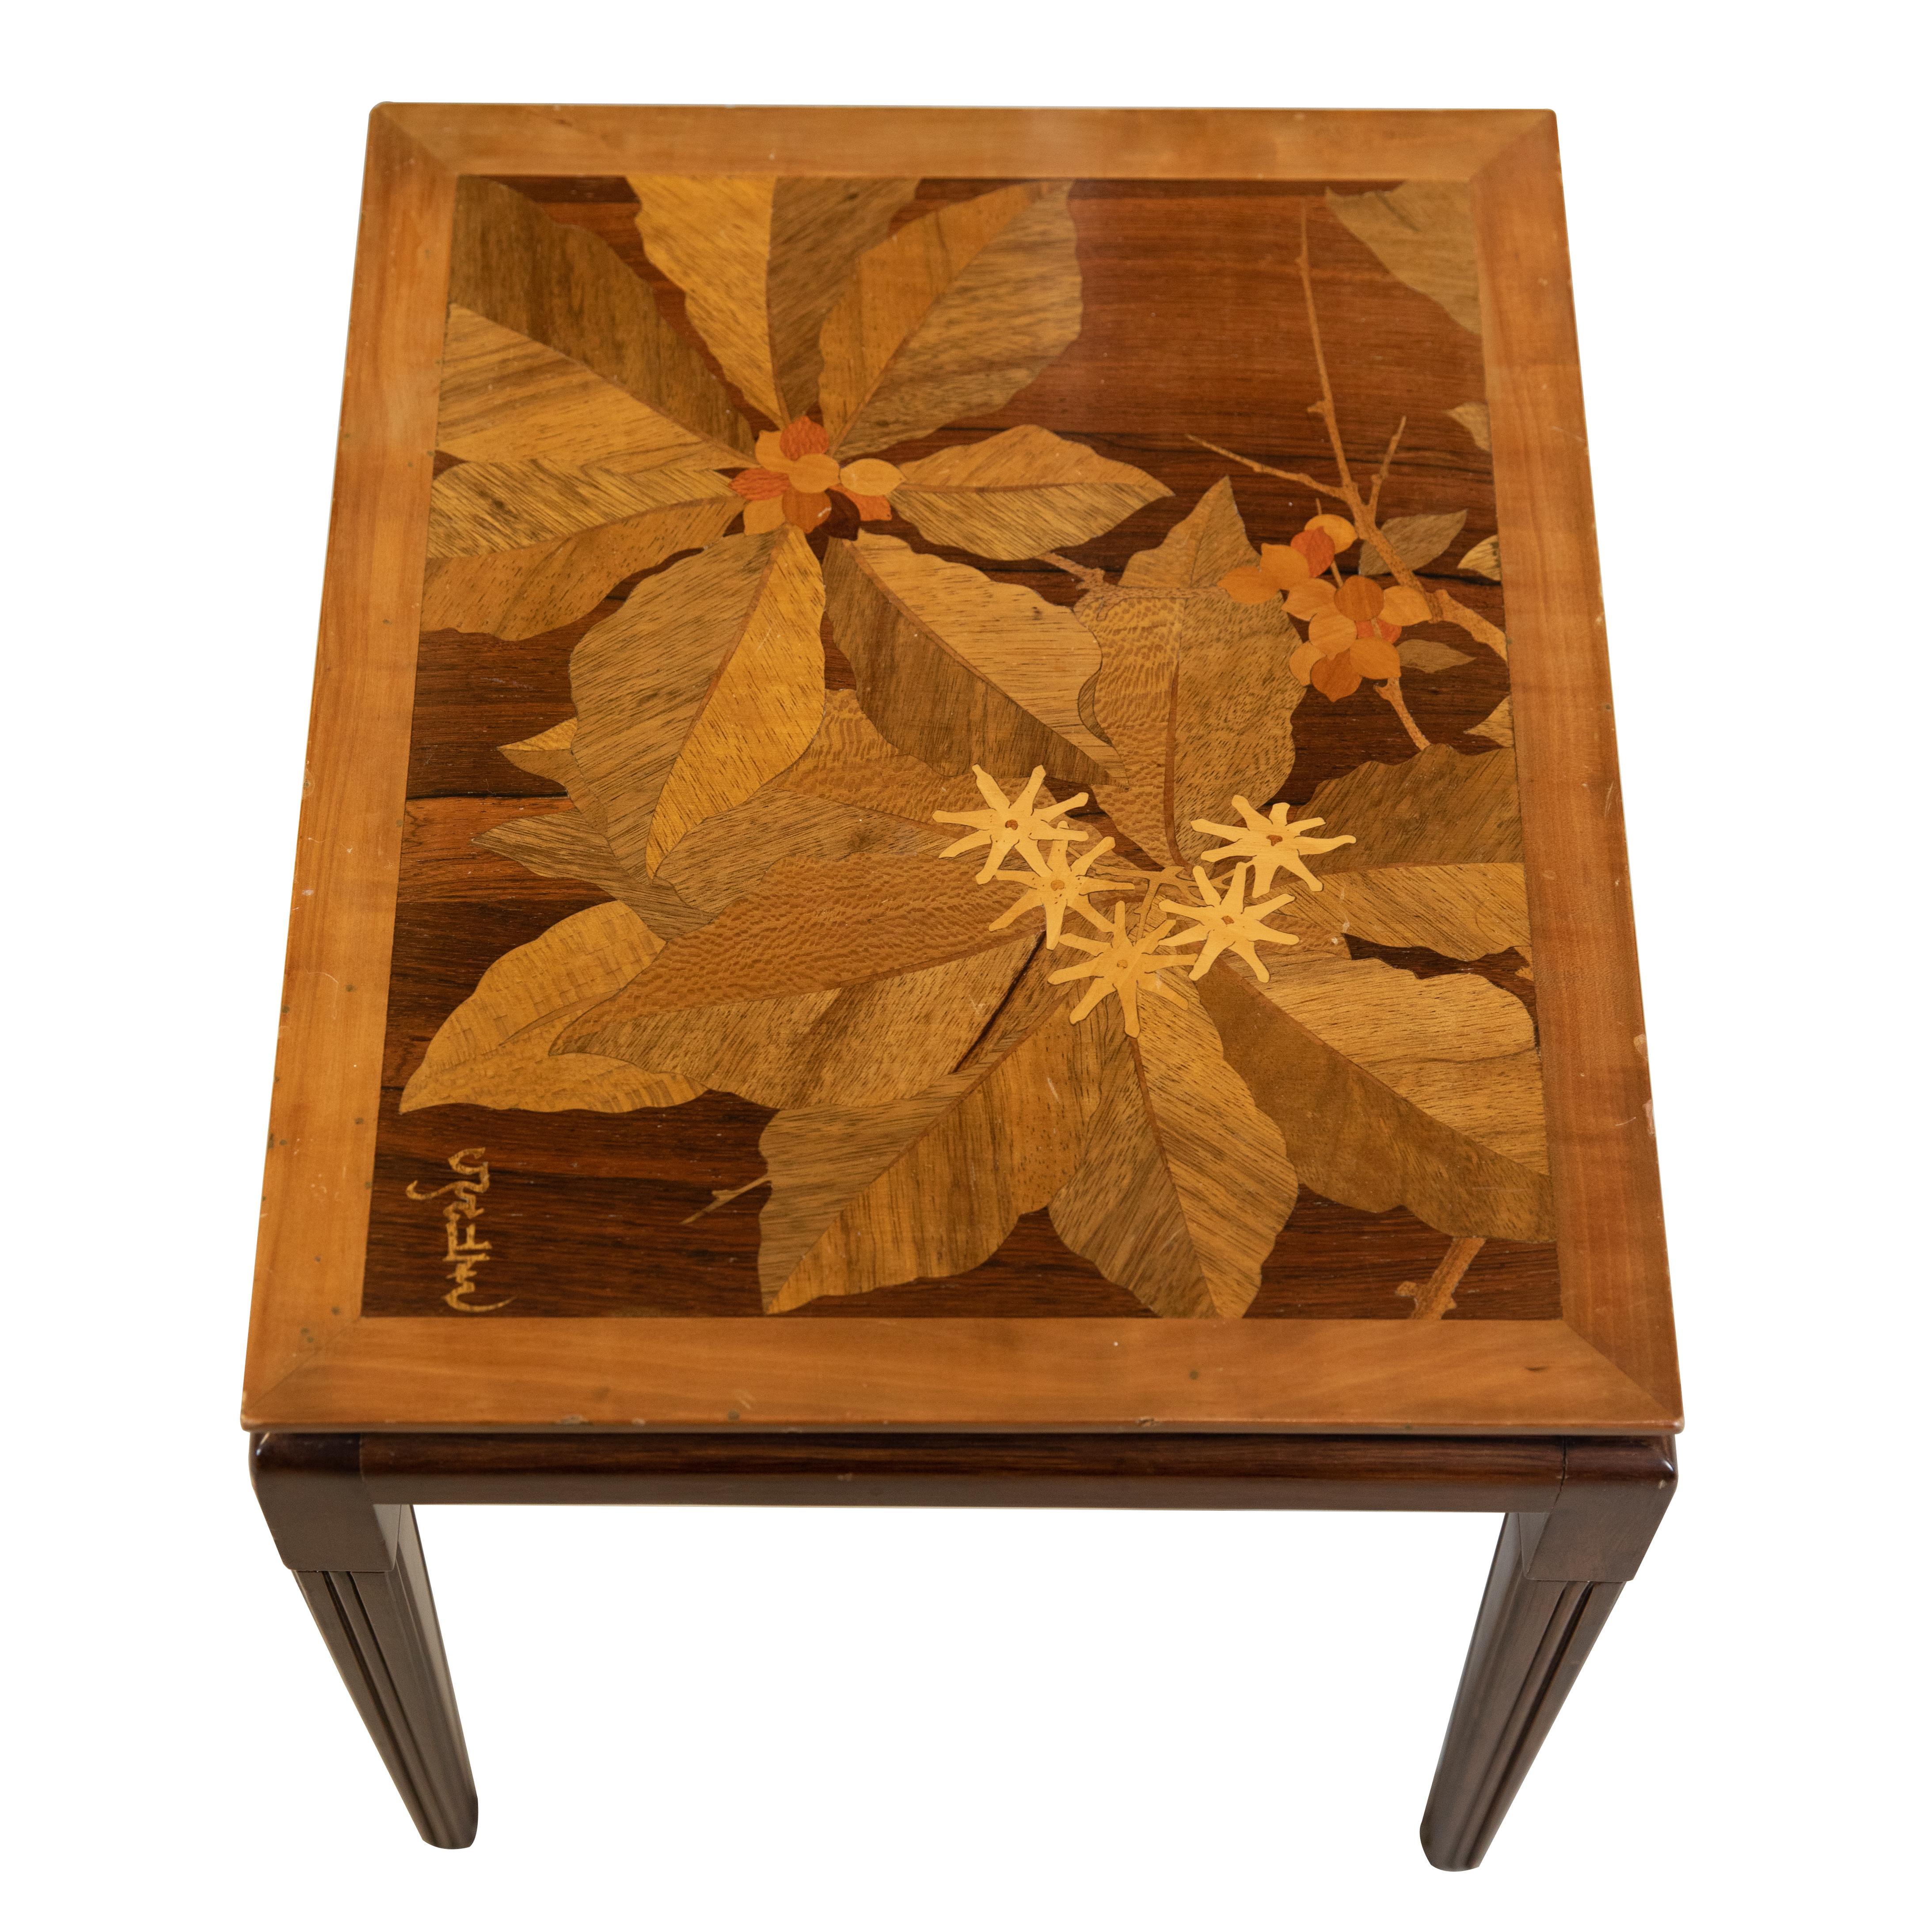 Gallé Inlaid Early 20th Century Art Nouveau Side Table with Floral Motifs 2